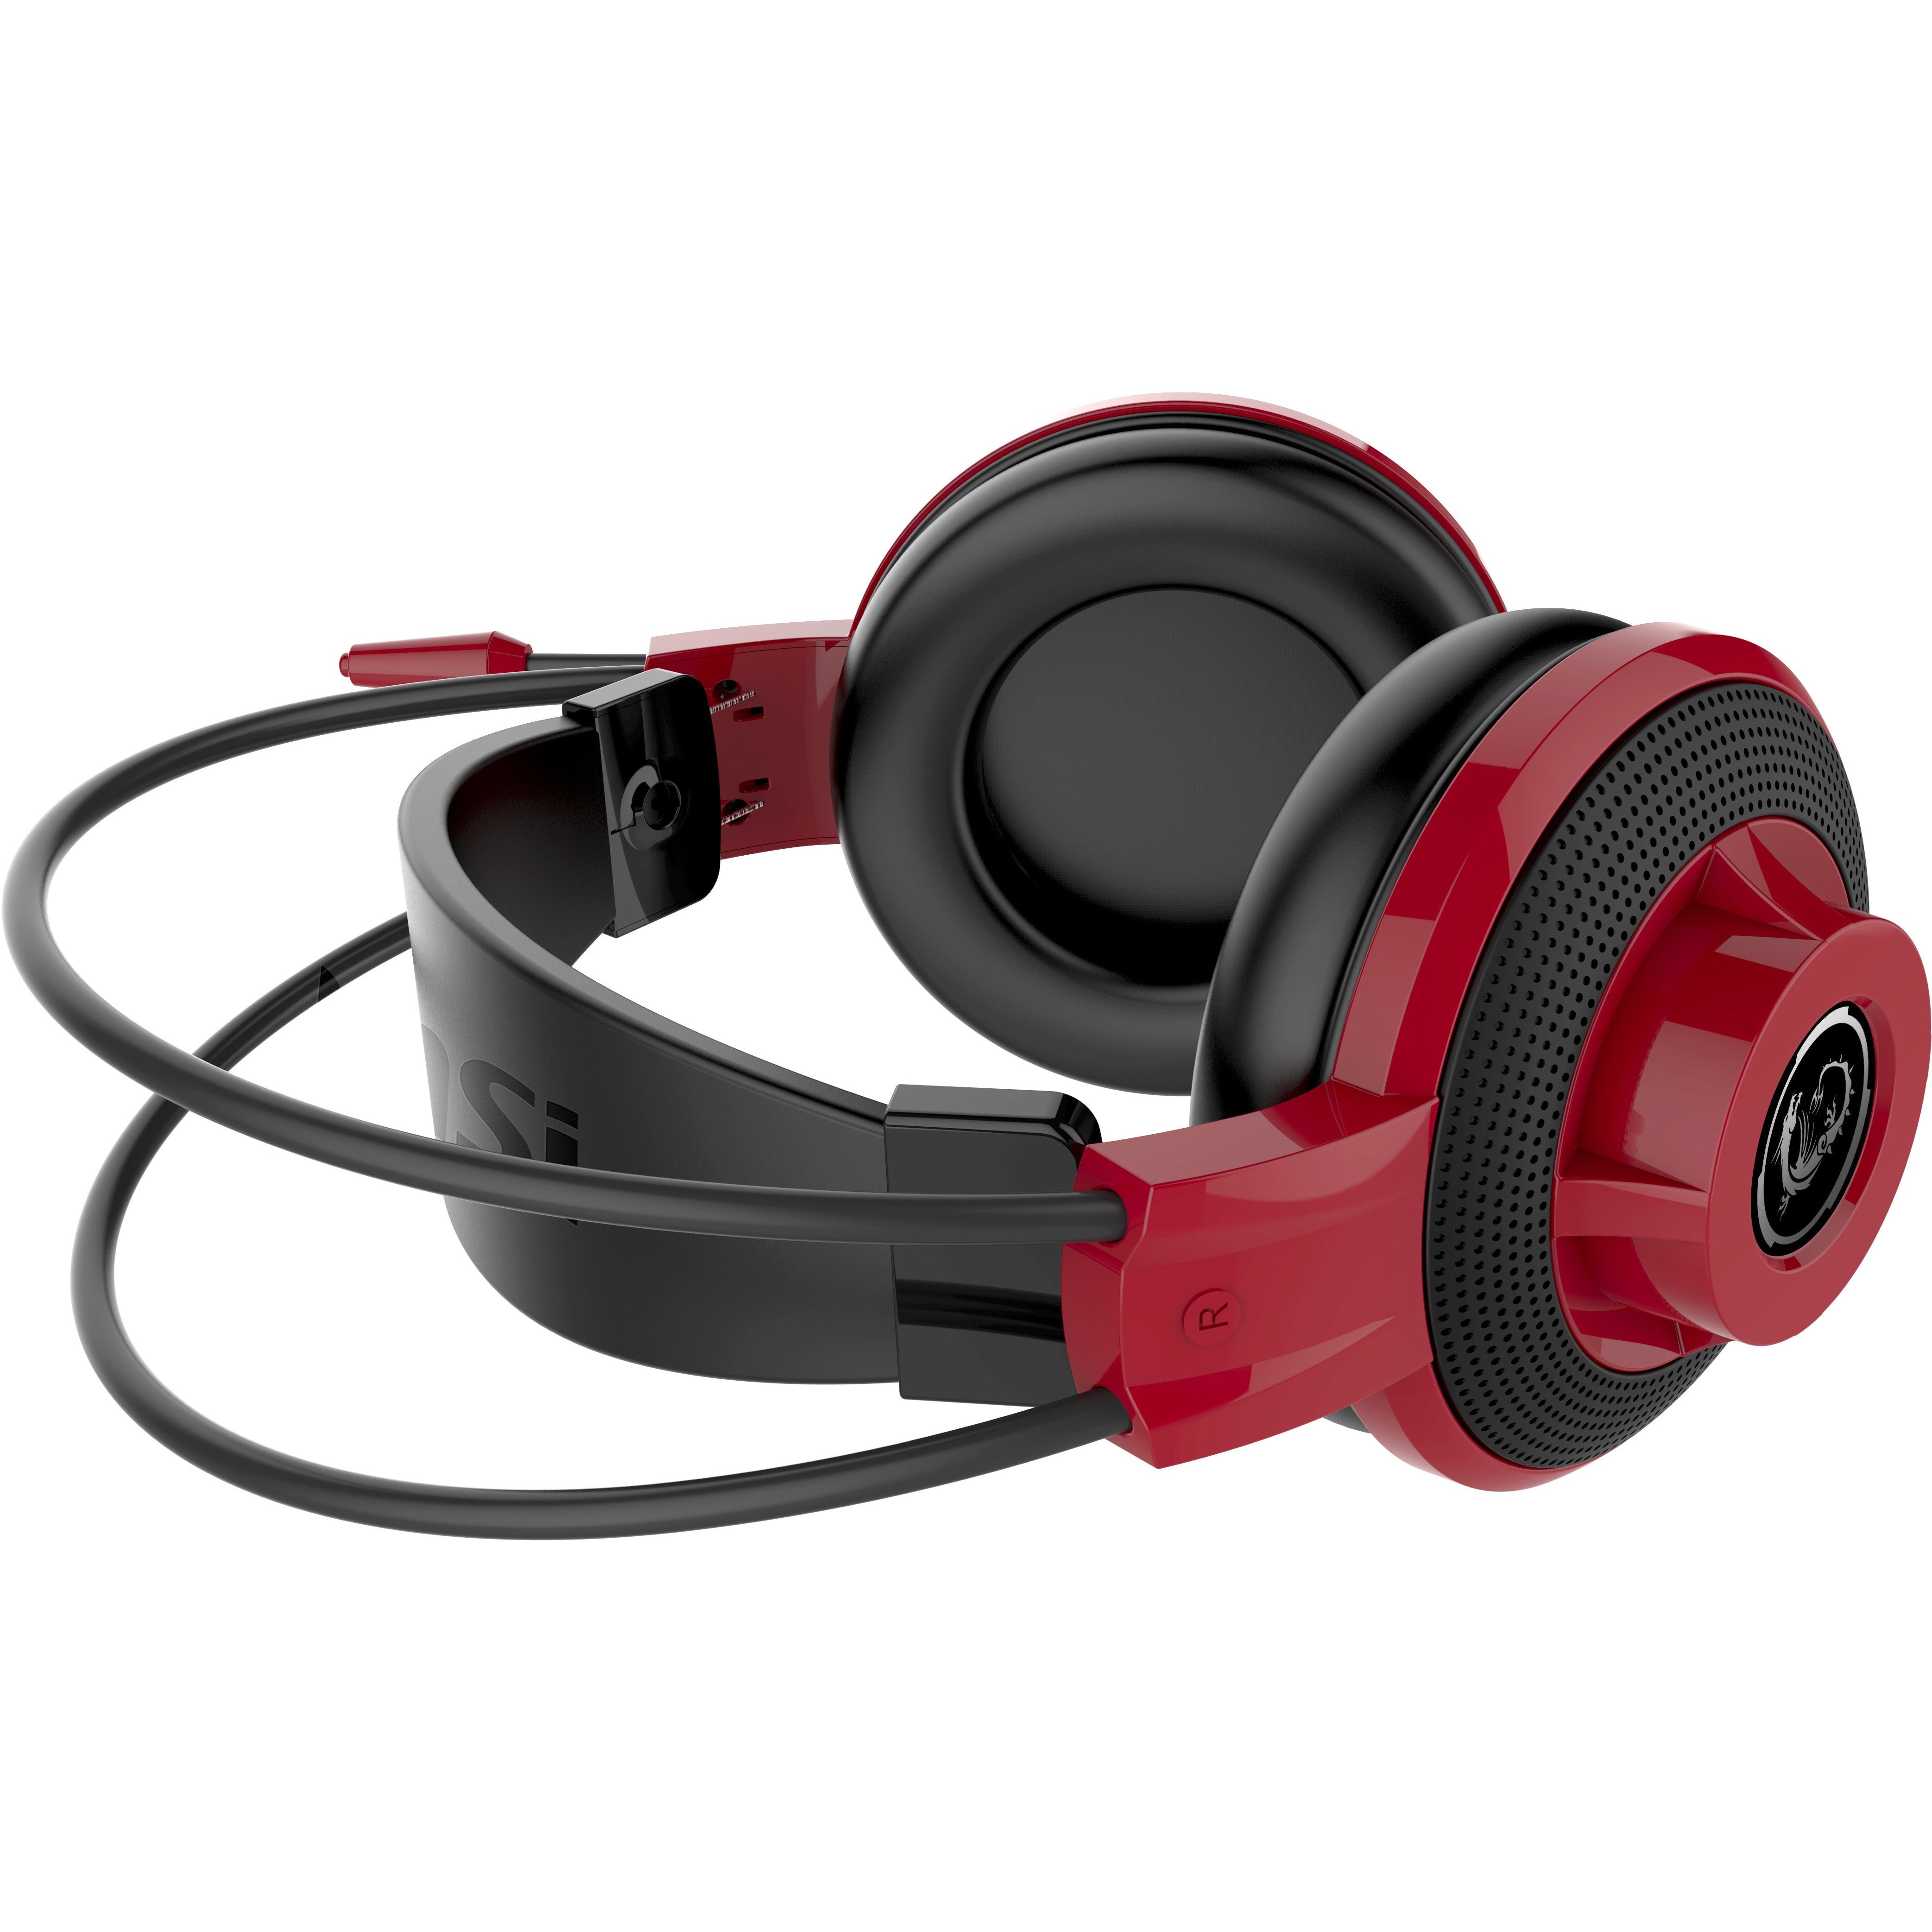 MSI DS501 Gaming Headset